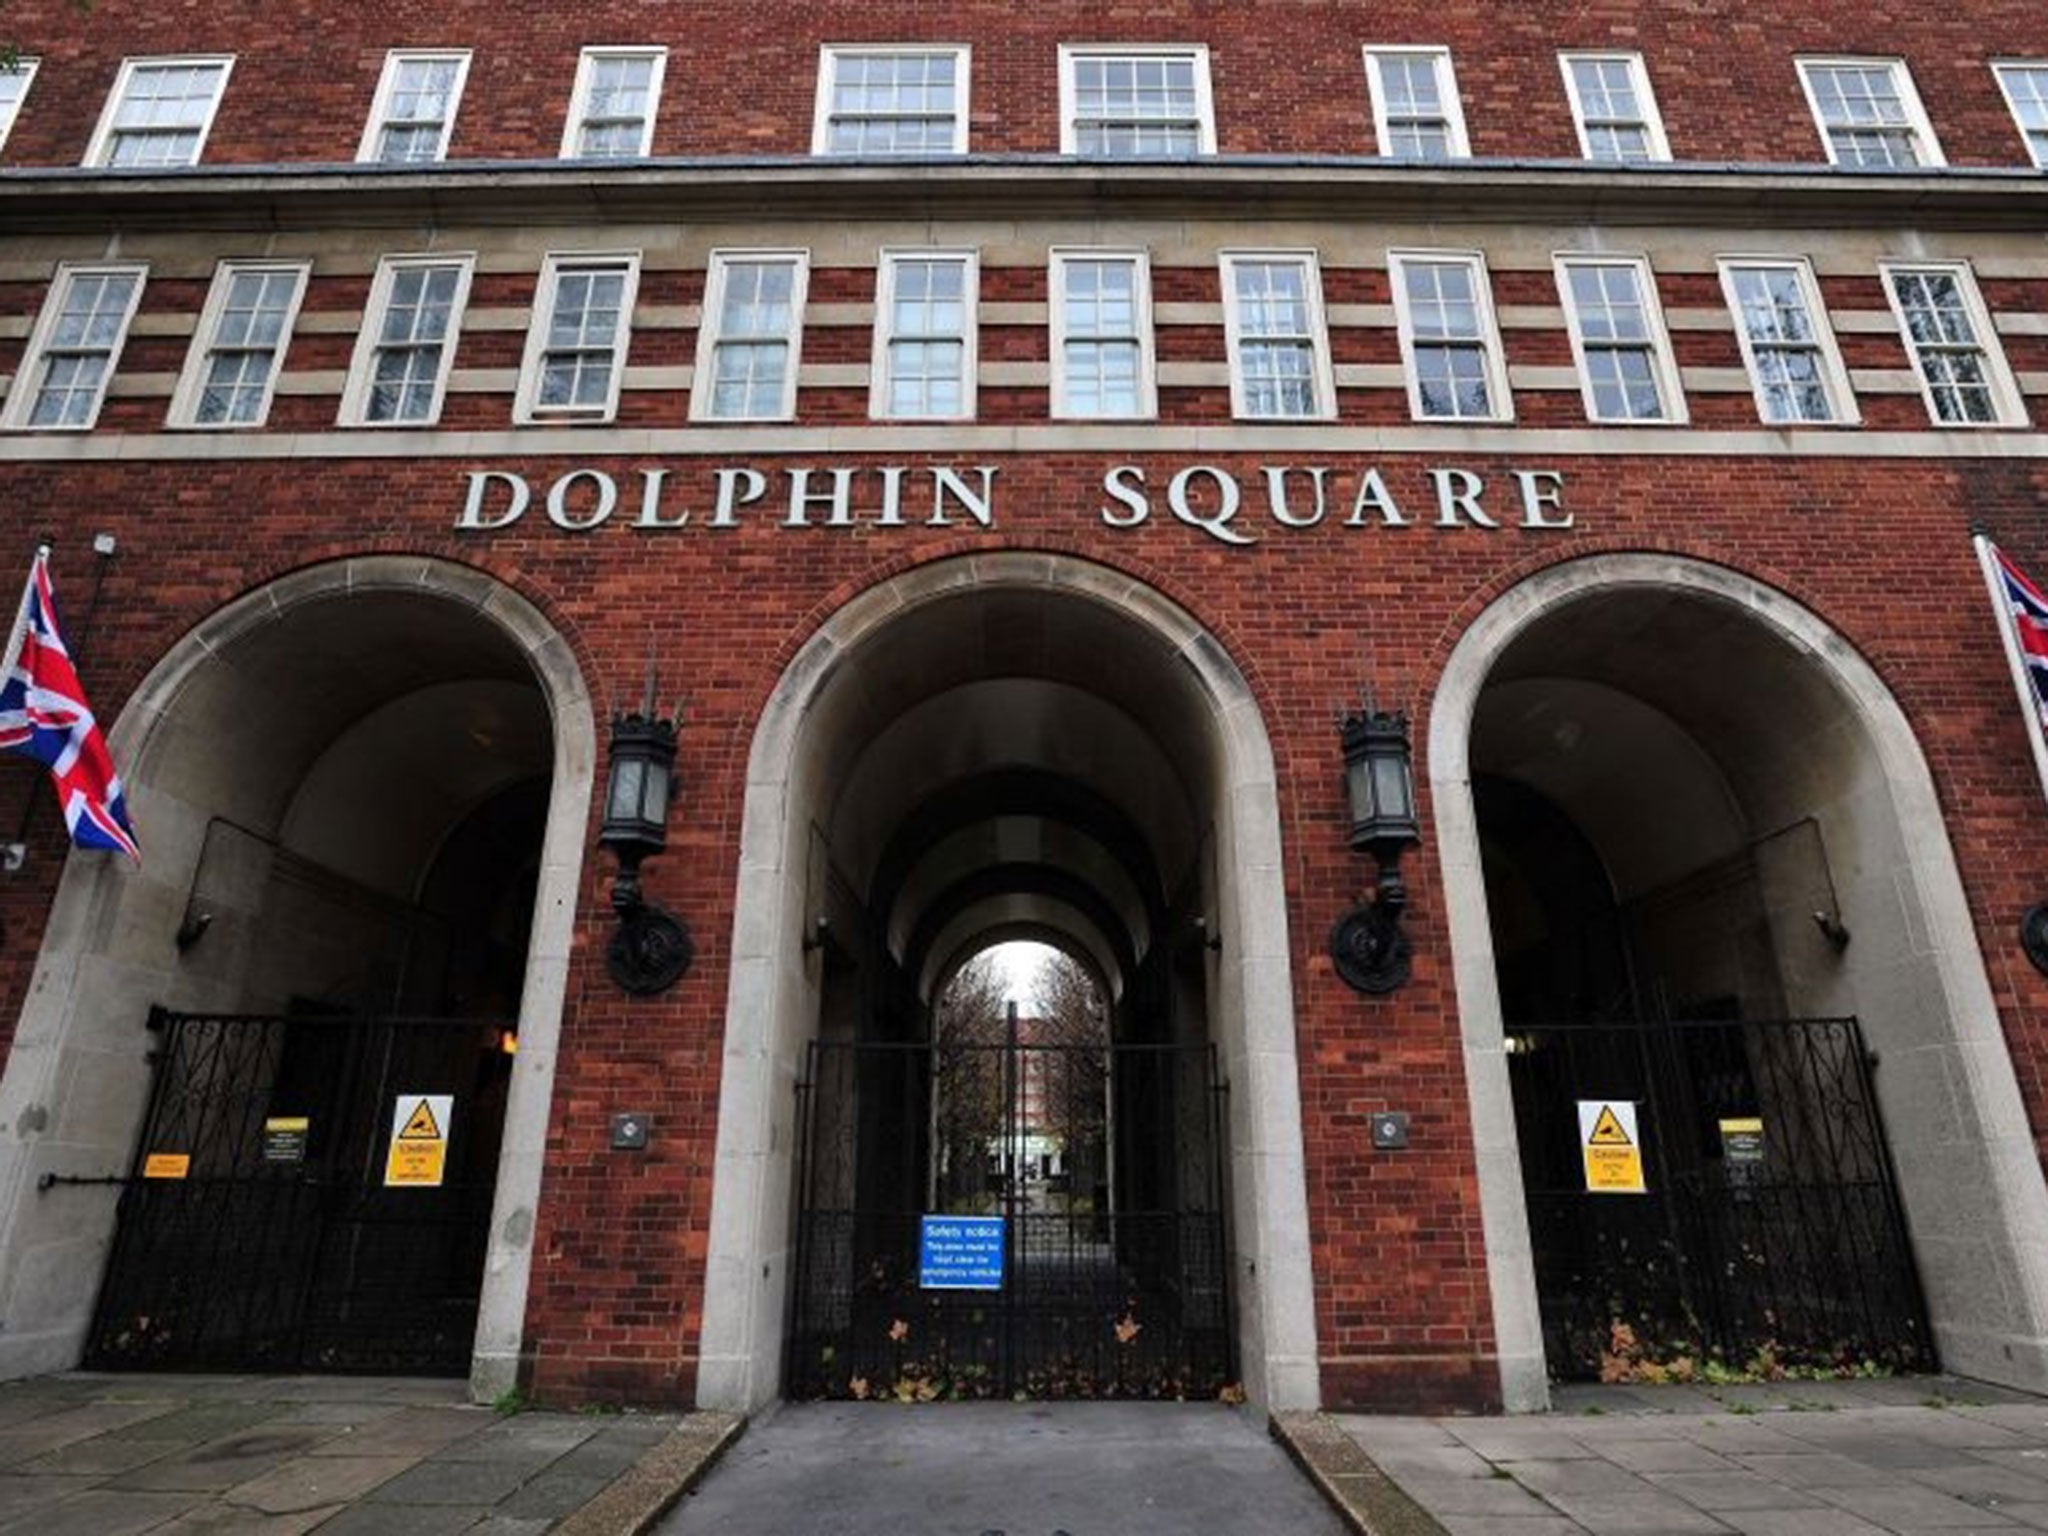 Dolphin Square where Lord Sewel allegedly took drugs with prostitutes